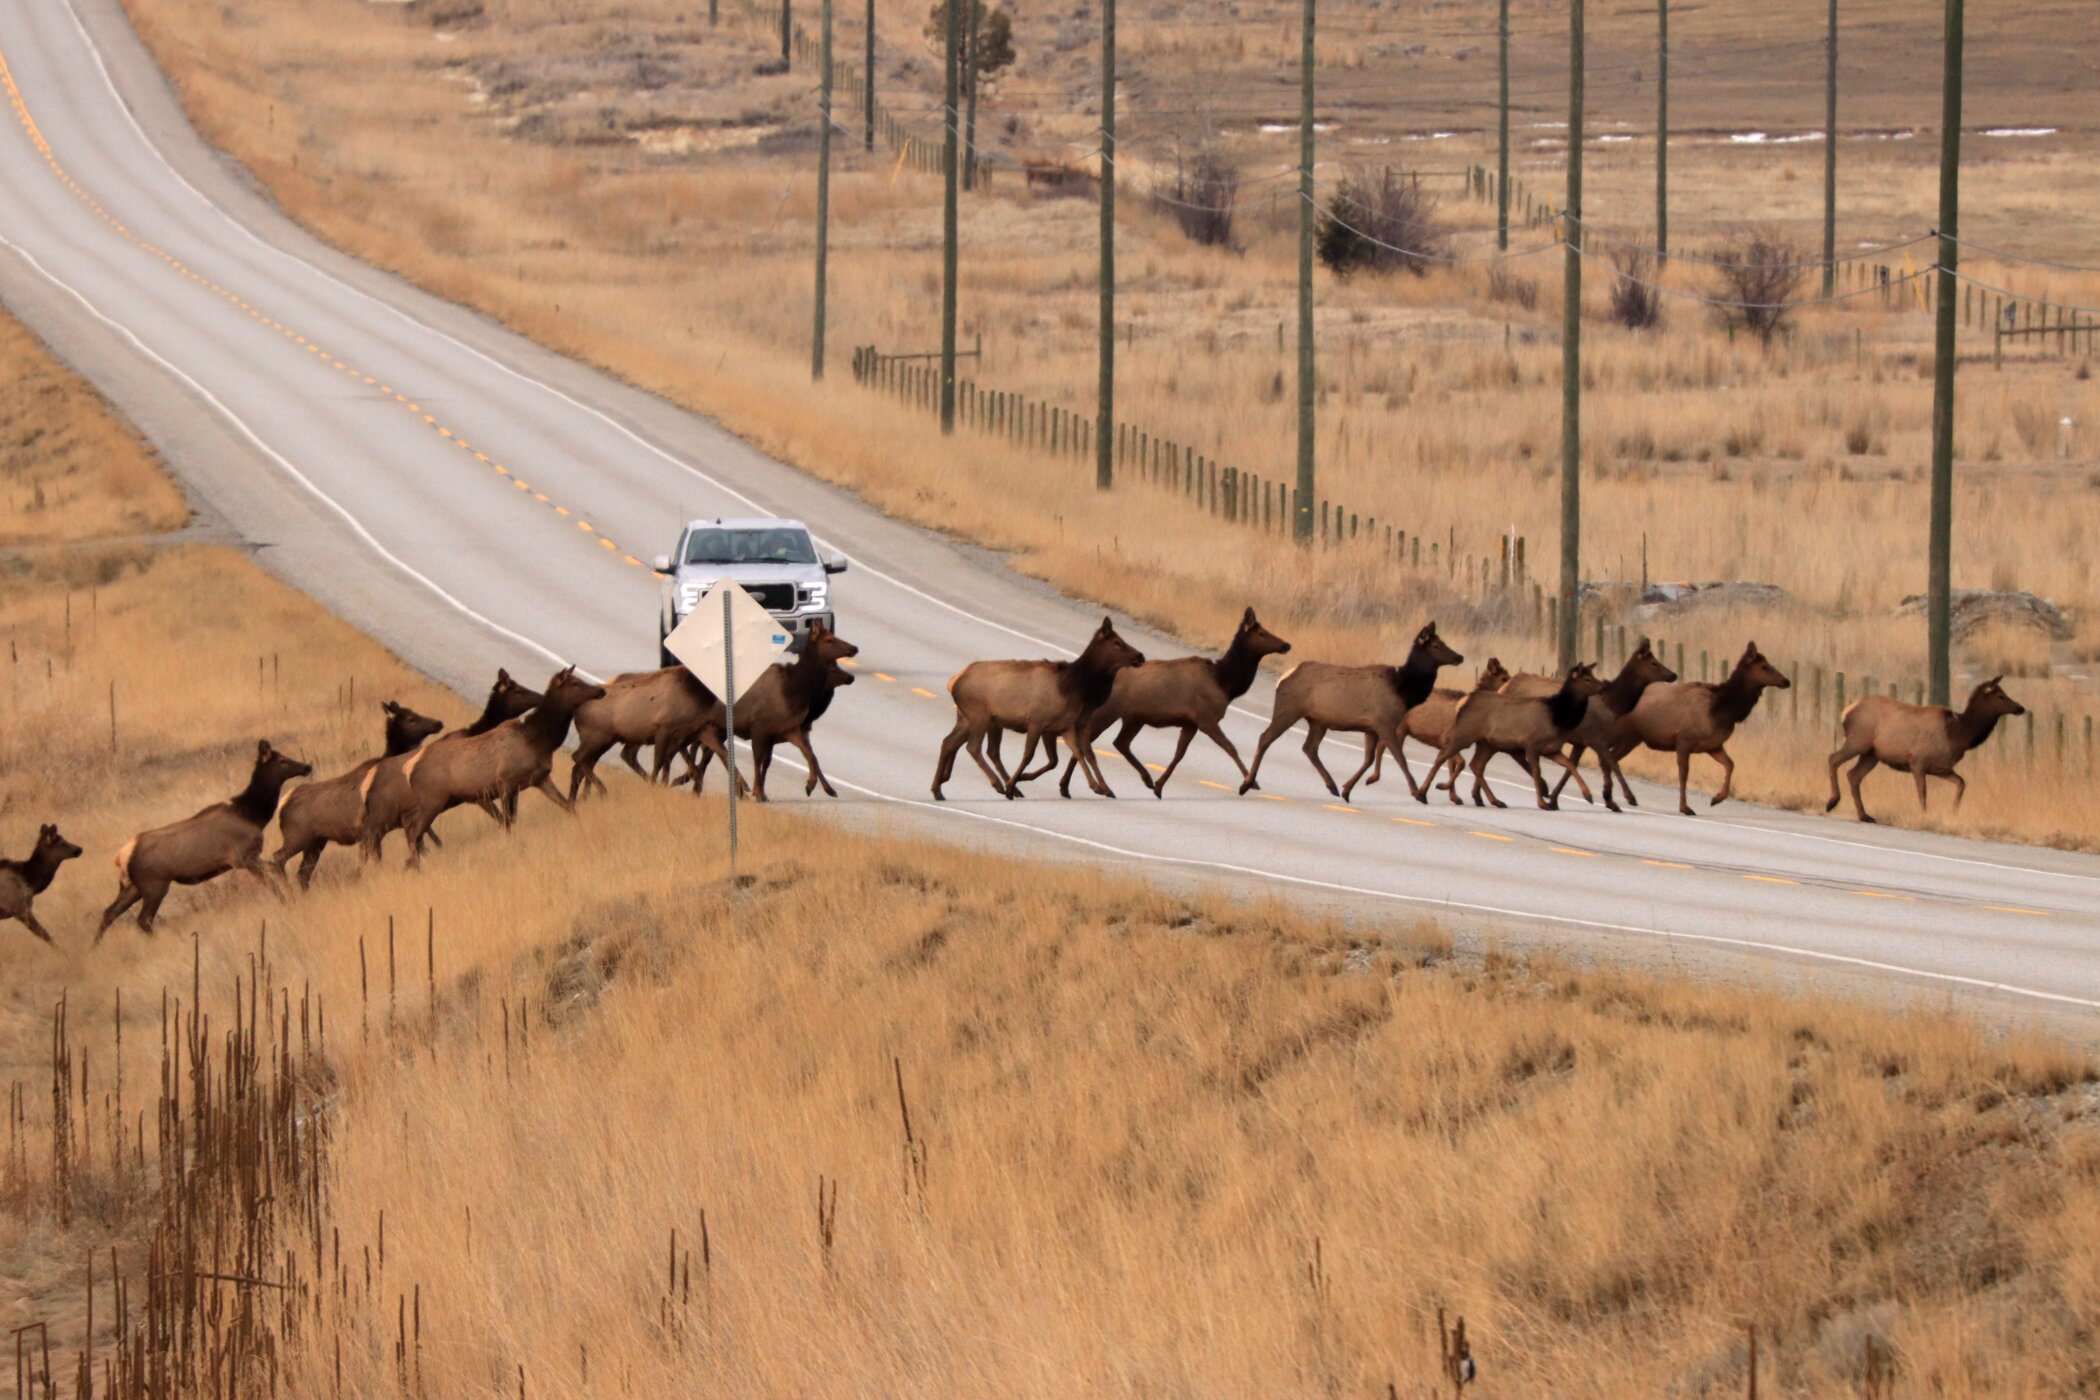 A herd of elk crosses a highway in front a vehicle in a grassy environment